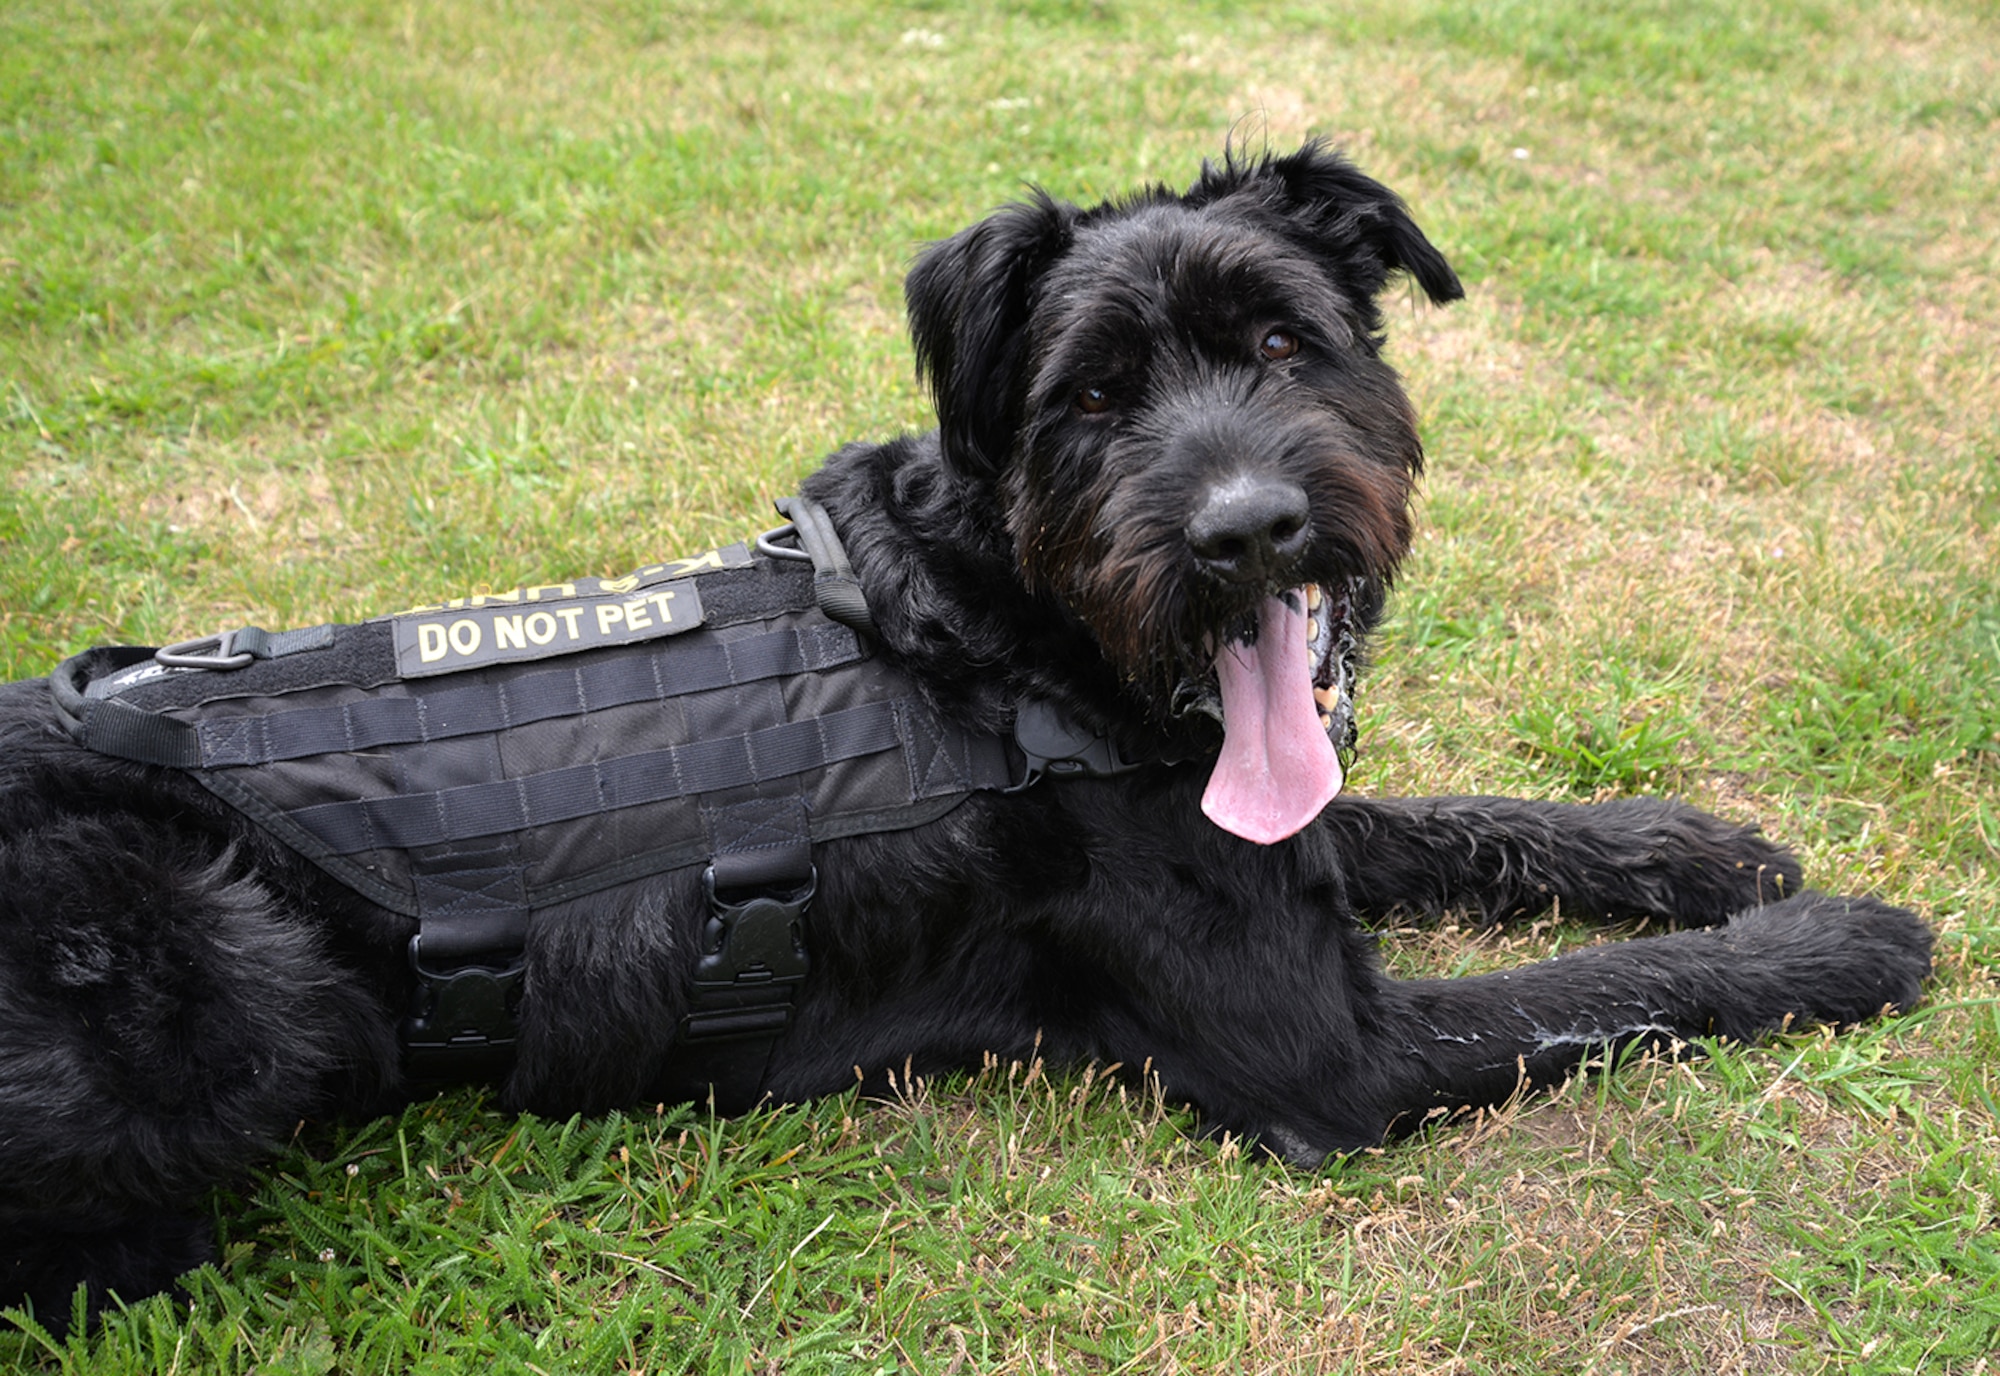 Military Working Dog Brock, 100th Security Forces Squadron, shows off his uniform after a training session July 11, 2017, on RAF Mildenhall, England. Brock is unique as the only Giant Schnauzer in the Department of Defense. Looking different to the regular German Shepherd and Belgian Malinois working dogs means people often think he is a pet. (U.S. Air Force photo by Karen Abeyasekere)